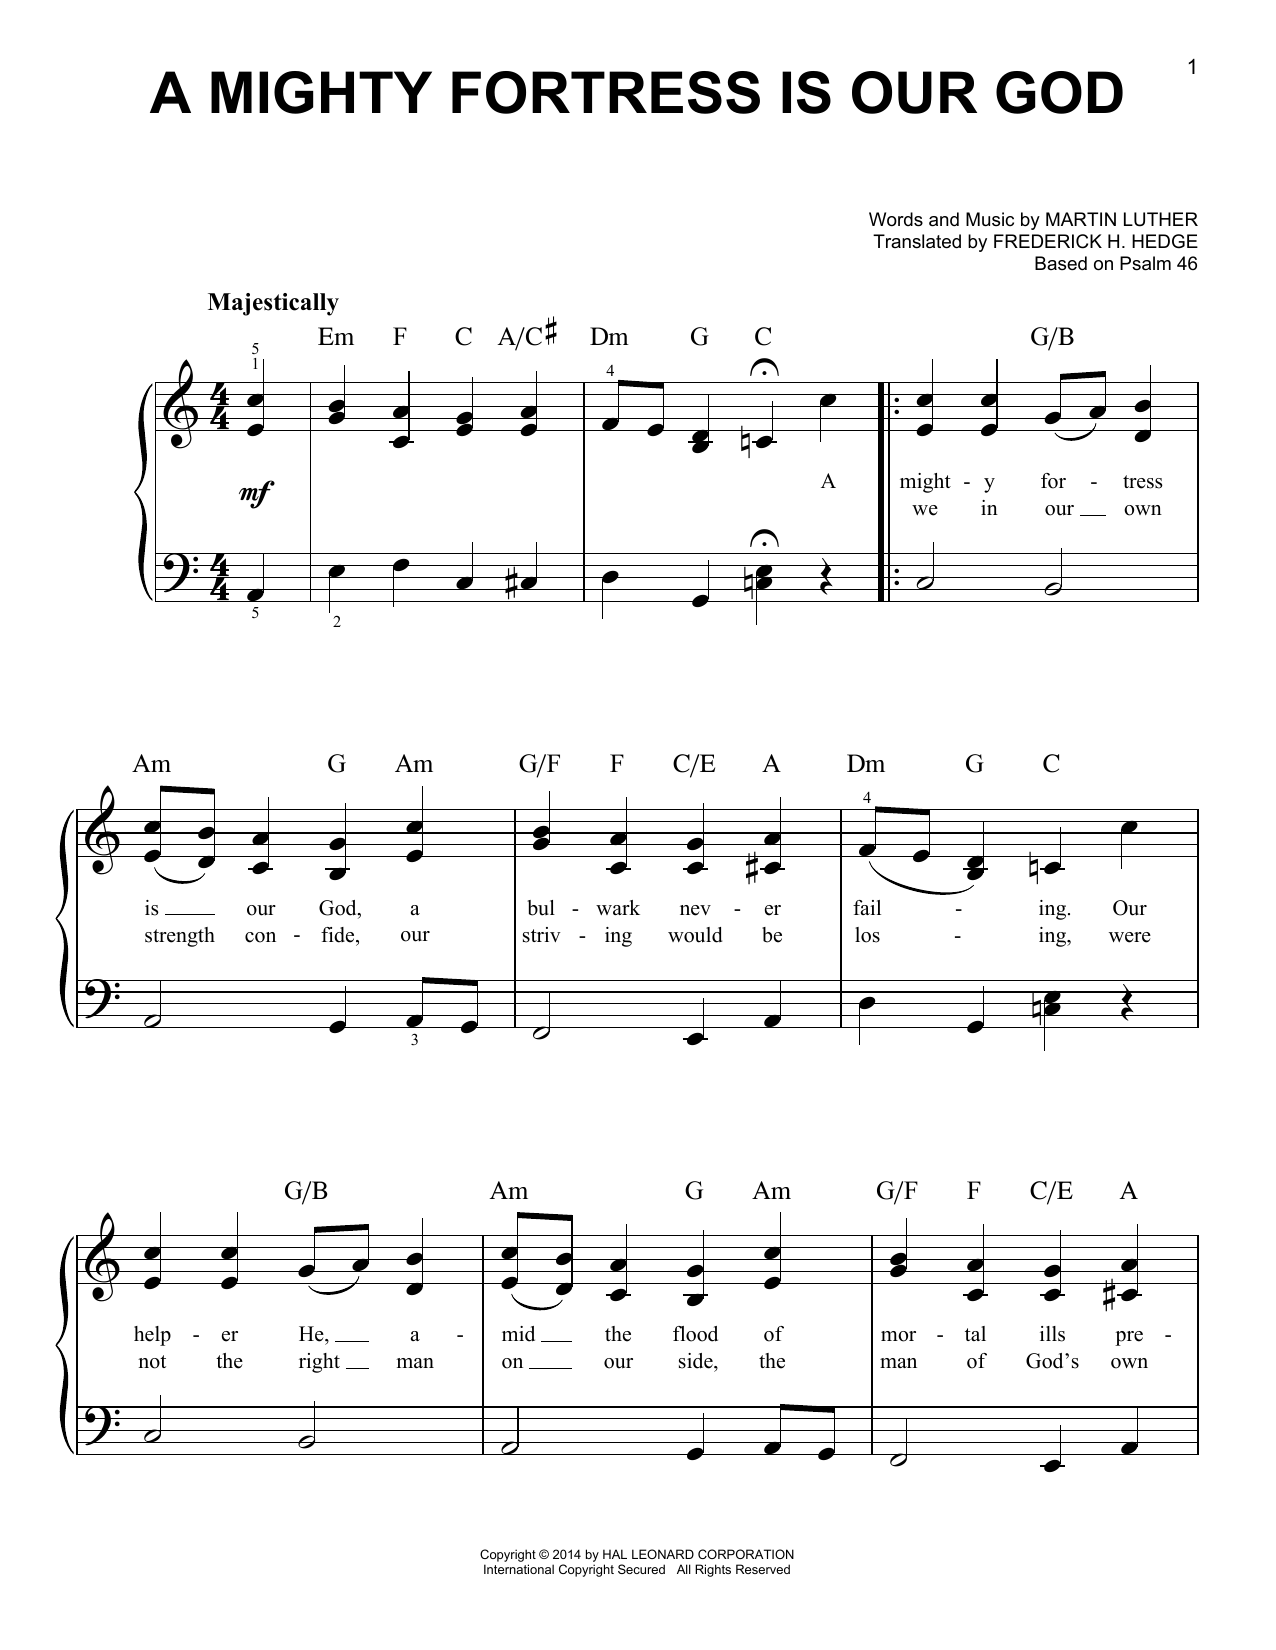 Download Frederick H. Hedge A Mighty Fortress Is Our God Sheet Music